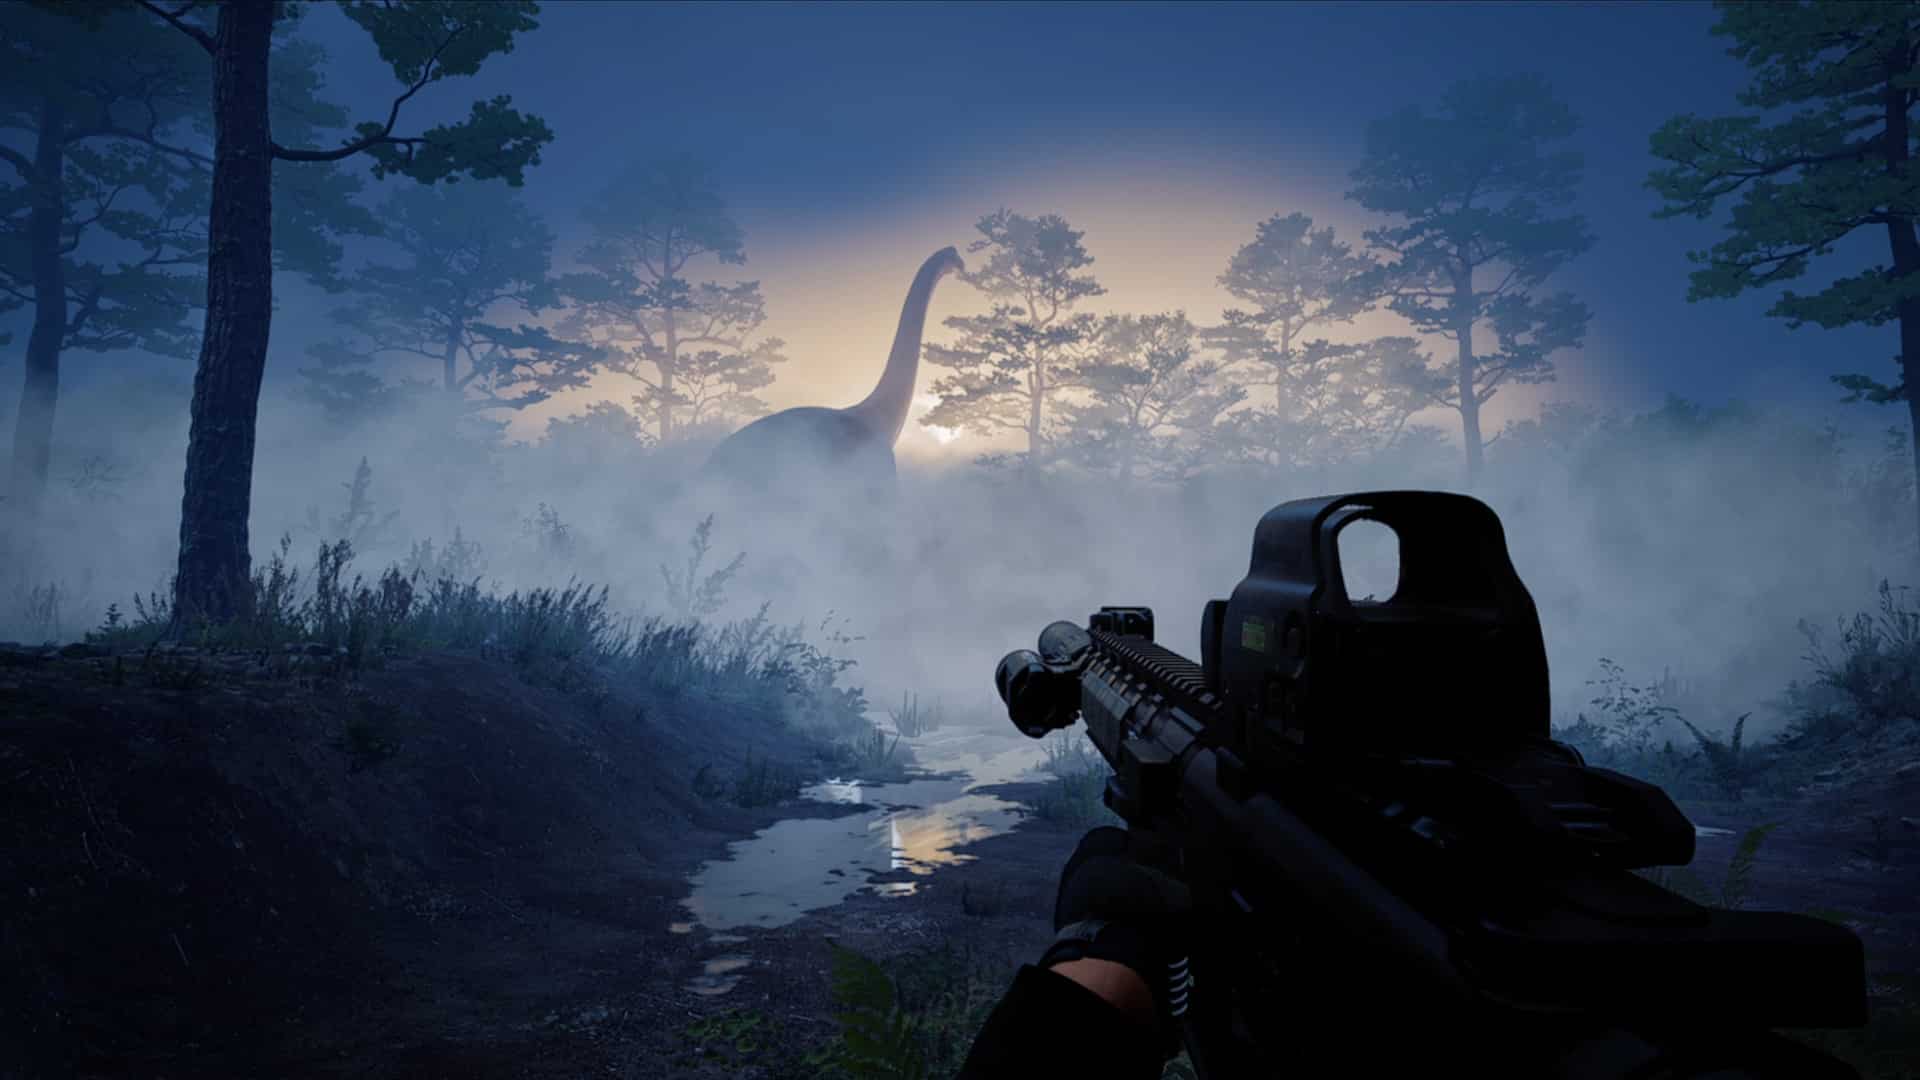 Dinosaur Action Game Instinction Receives Funding and Ramps Up Development